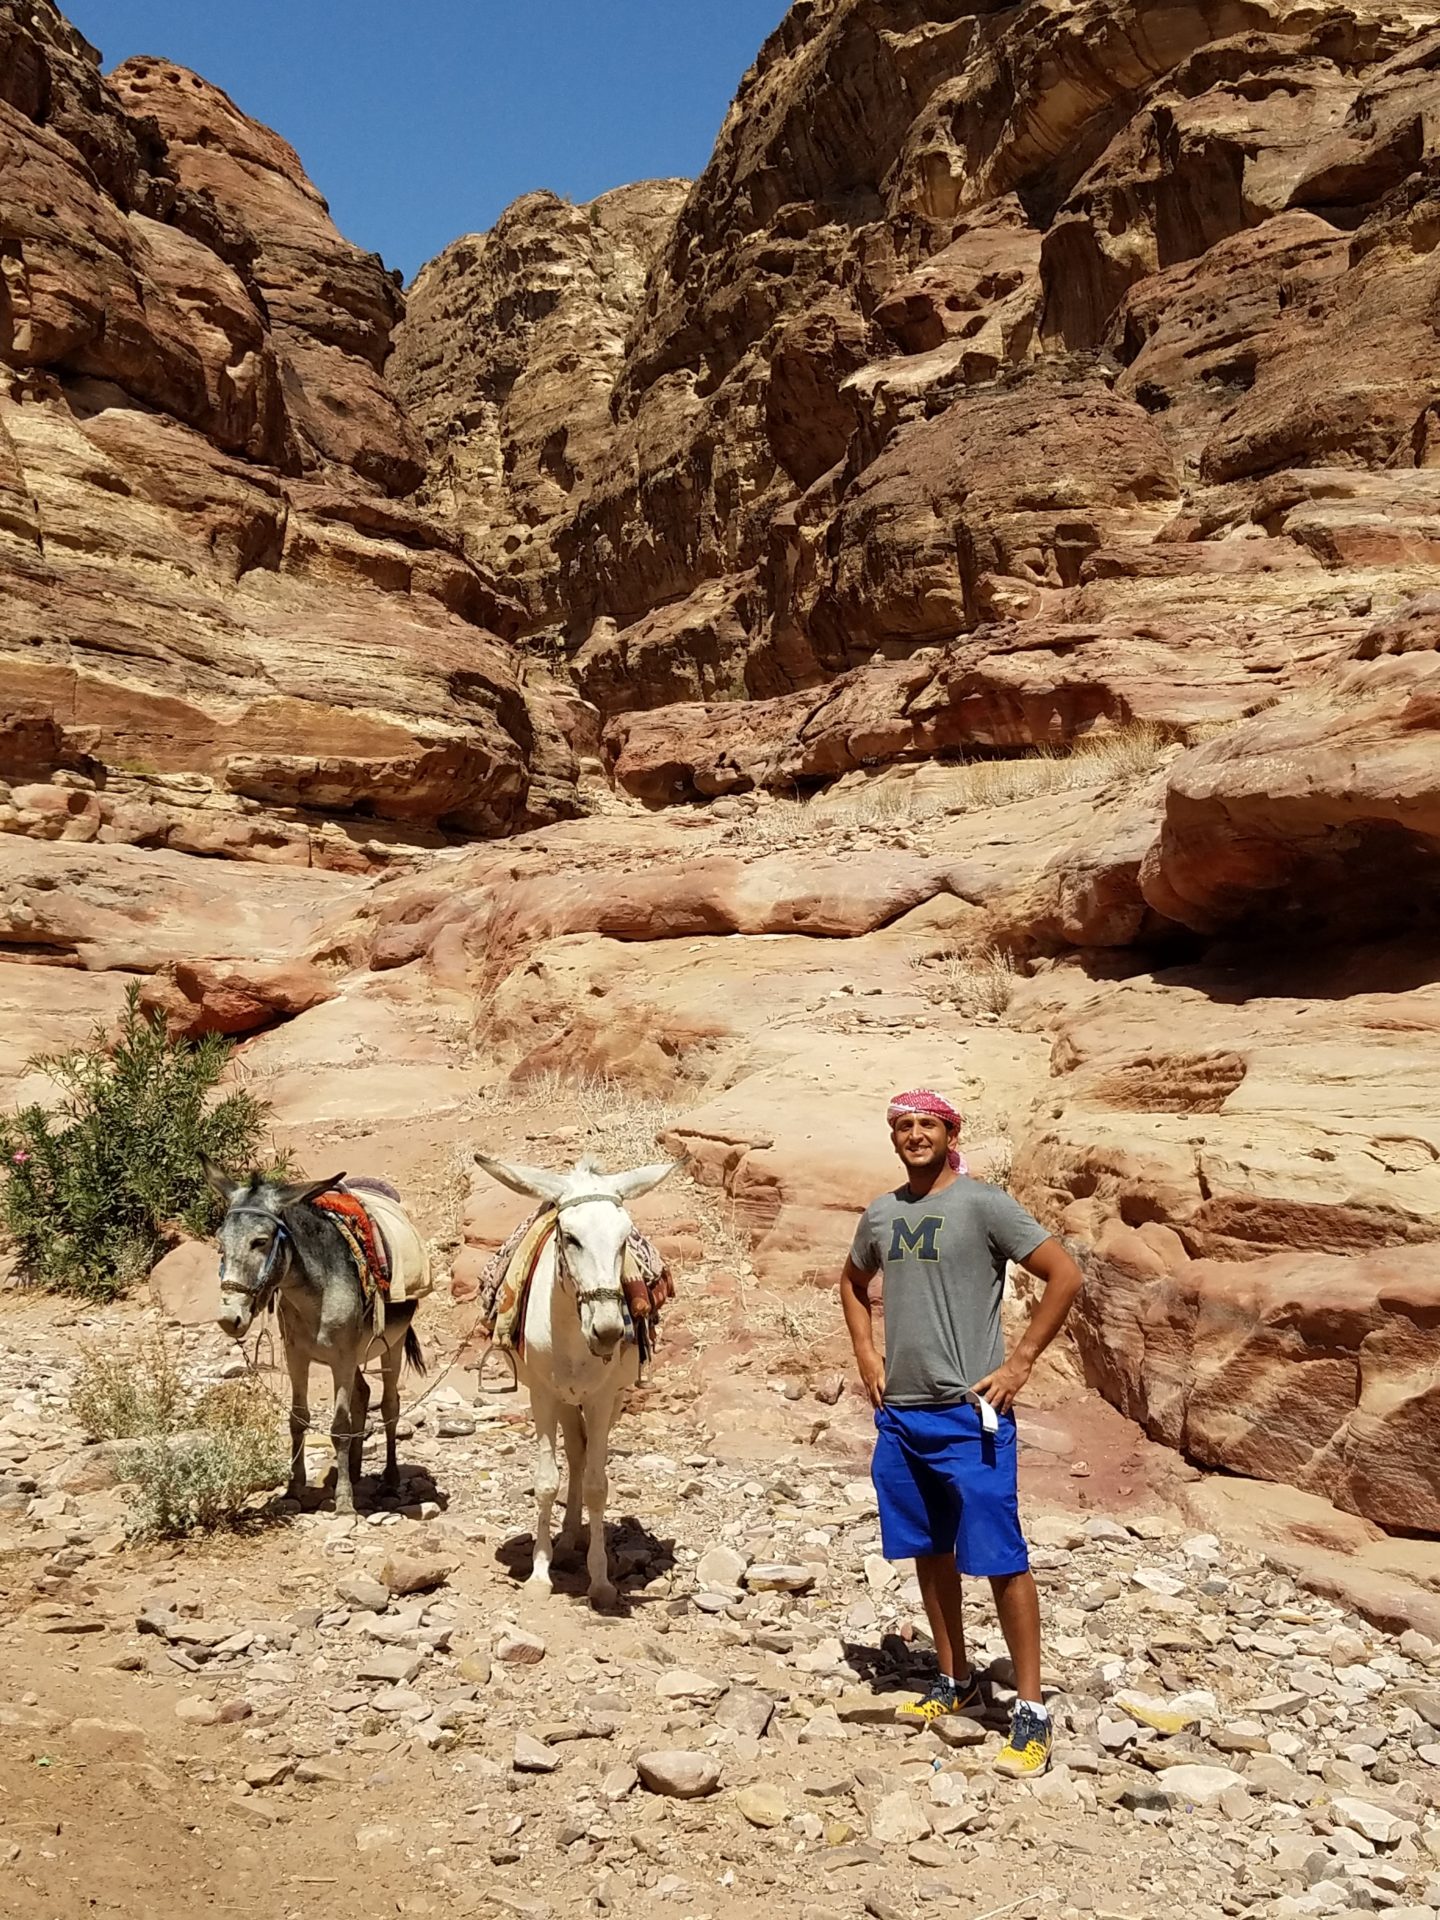 a man standing next to a donkey in a rocky area